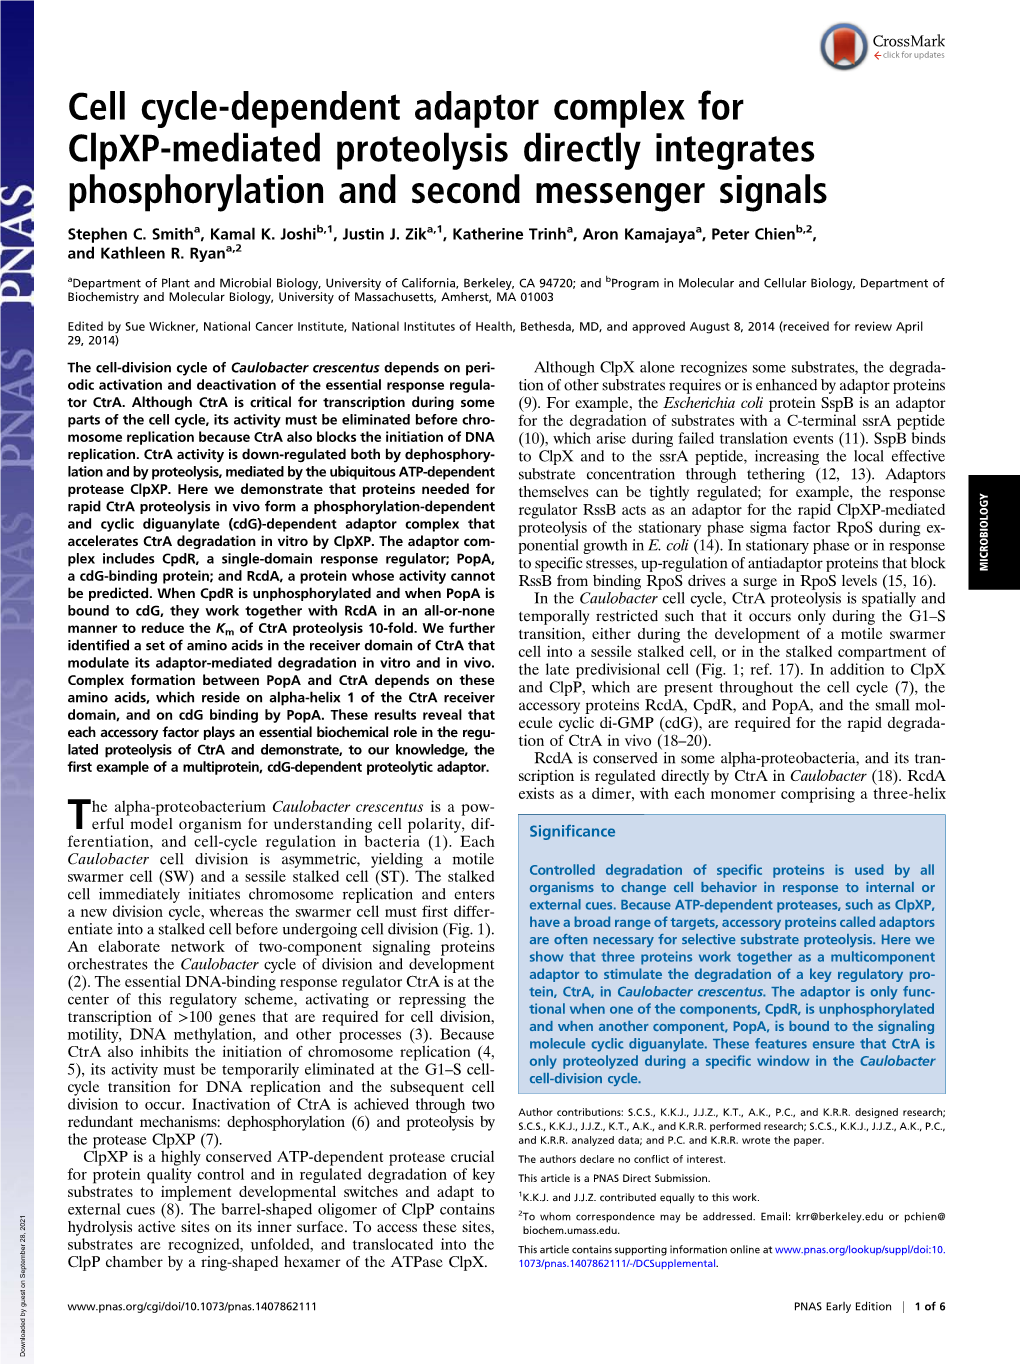 Cell Cycle-Dependent Adaptor Complex for Clpxp-Mediated Proteolysis Directly Integrates Phosphorylation and Second Messenger Signals